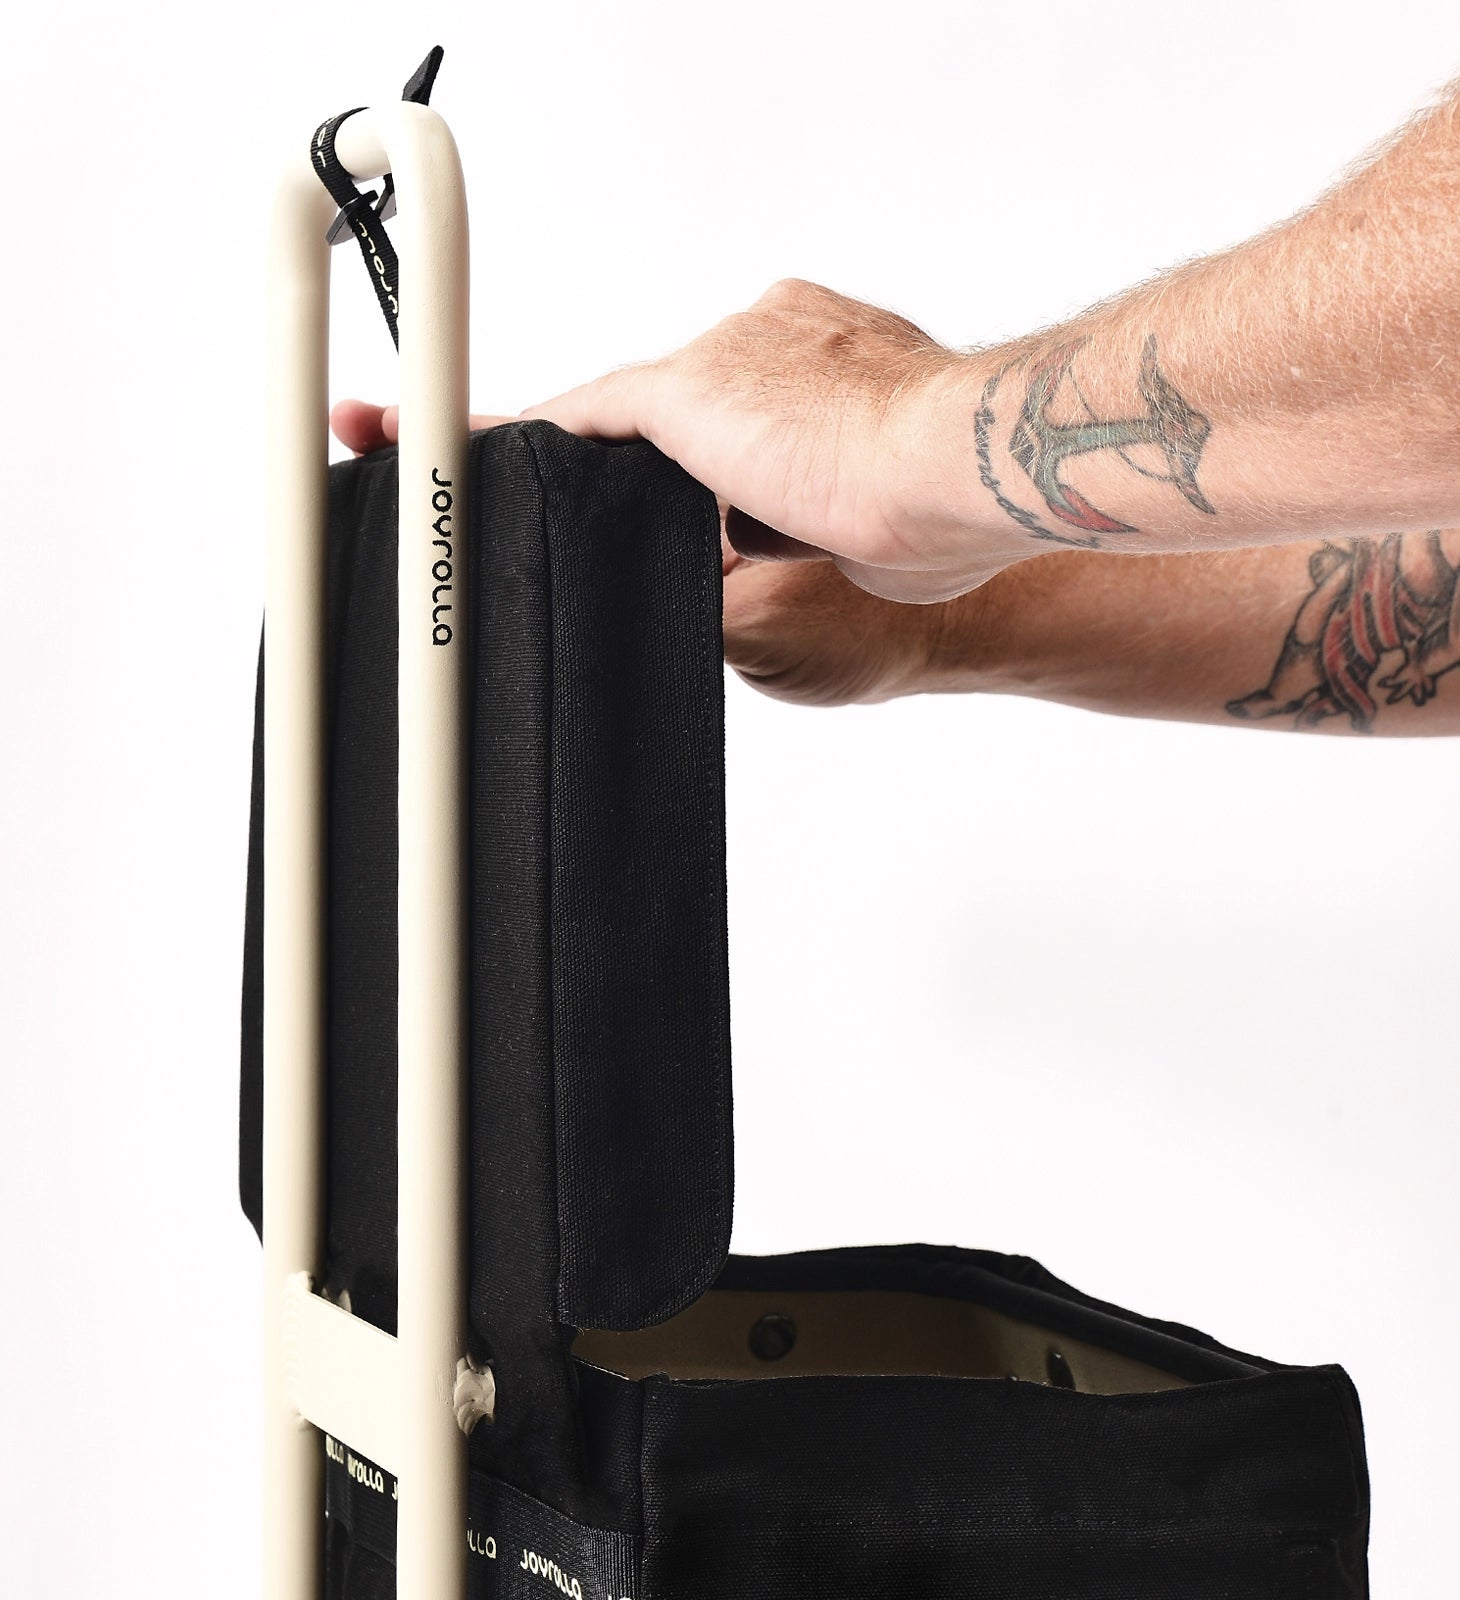 A close-up shot of the black Joyrolla Cart with a black bag attached. The frame of the cart is visible, showcasing its sturdy construction and sleek design. The lid of the cart is held up by a hand, revealing its easy-to-use functionality. The black bag attached to the cart adds storage capacity and is secured in place. This cart is a versatile and practical solution for transporting items with its durable frame, convenient lid, and ample storage space.